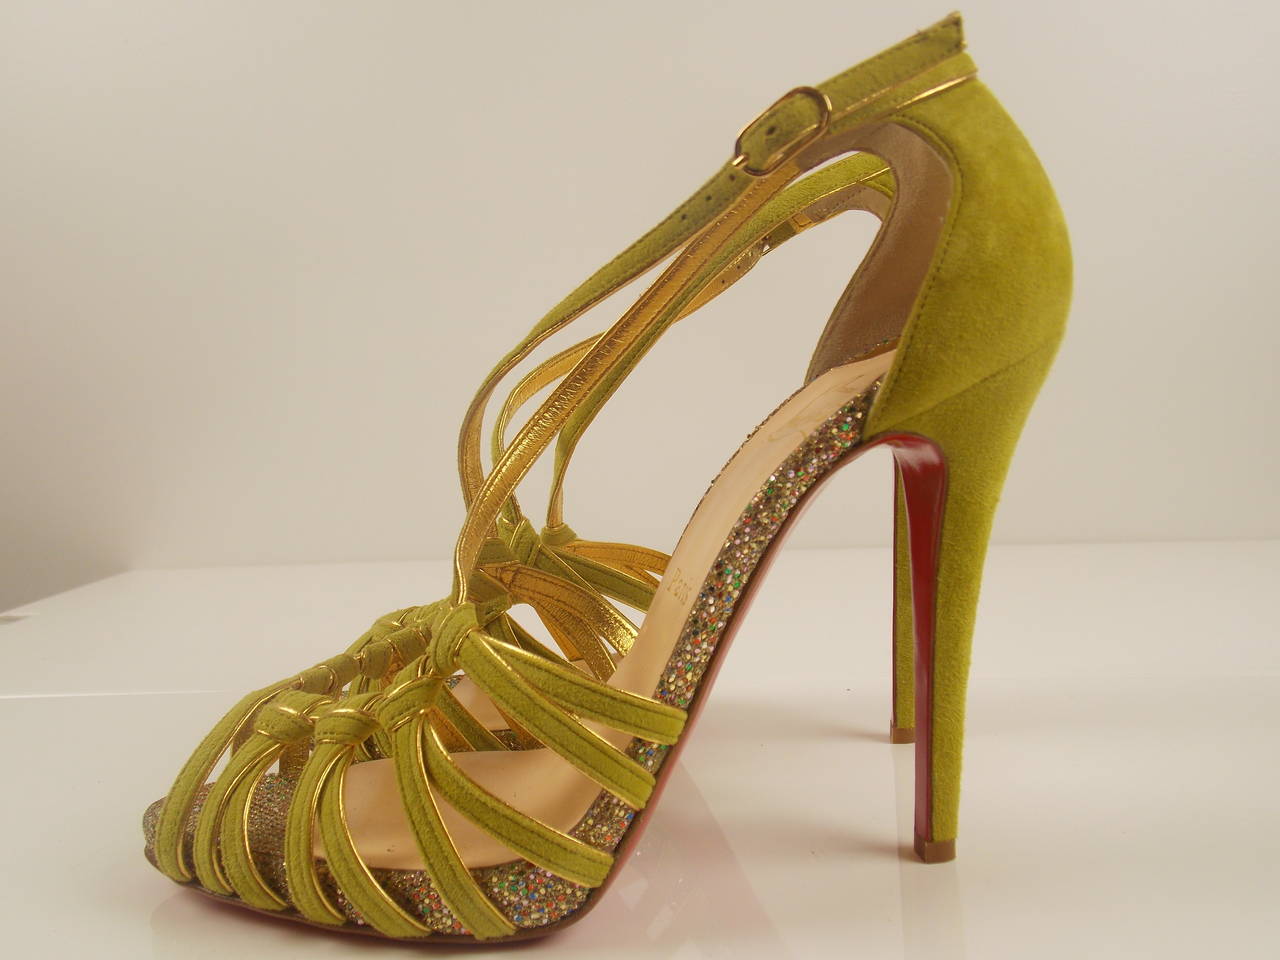 Christian Louboutin 8 Mignons 150mm Peep Toe Pumps, Suede with Gold Leather Trim, 4